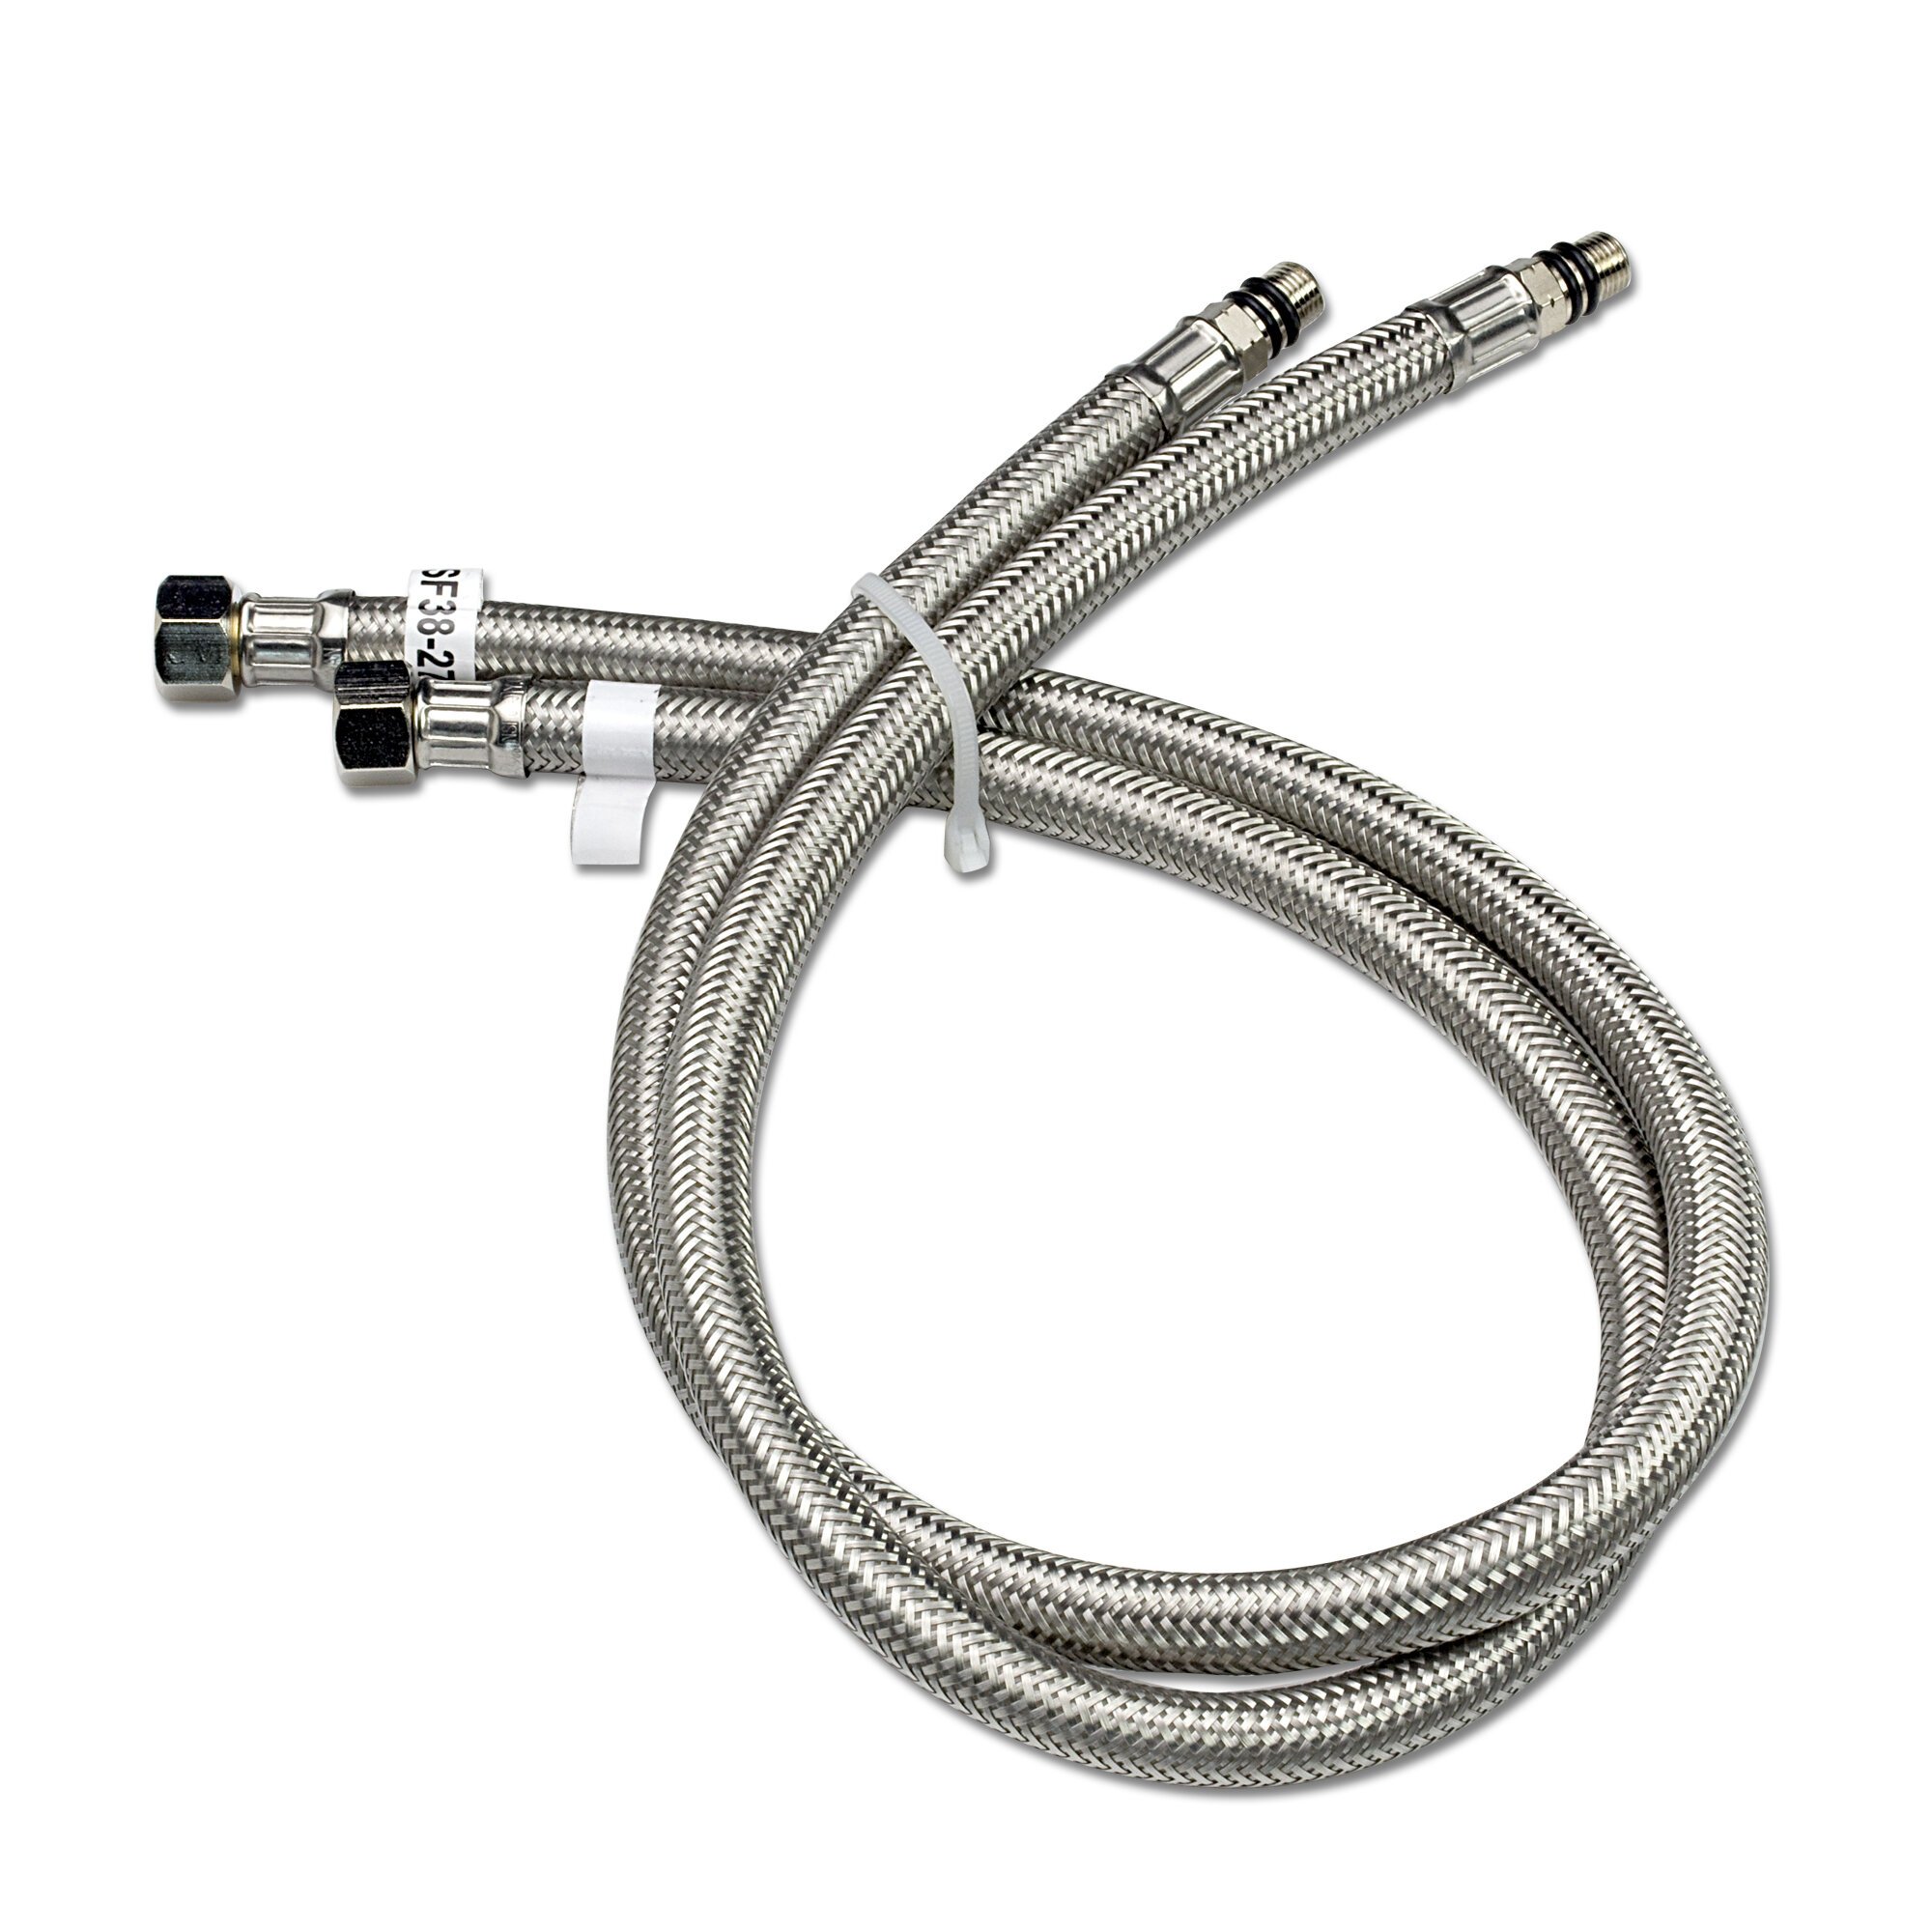 Stainless Steel Braided Tube Hose Toilet Inlet Pipe Water Metal Faucet Hoses LH